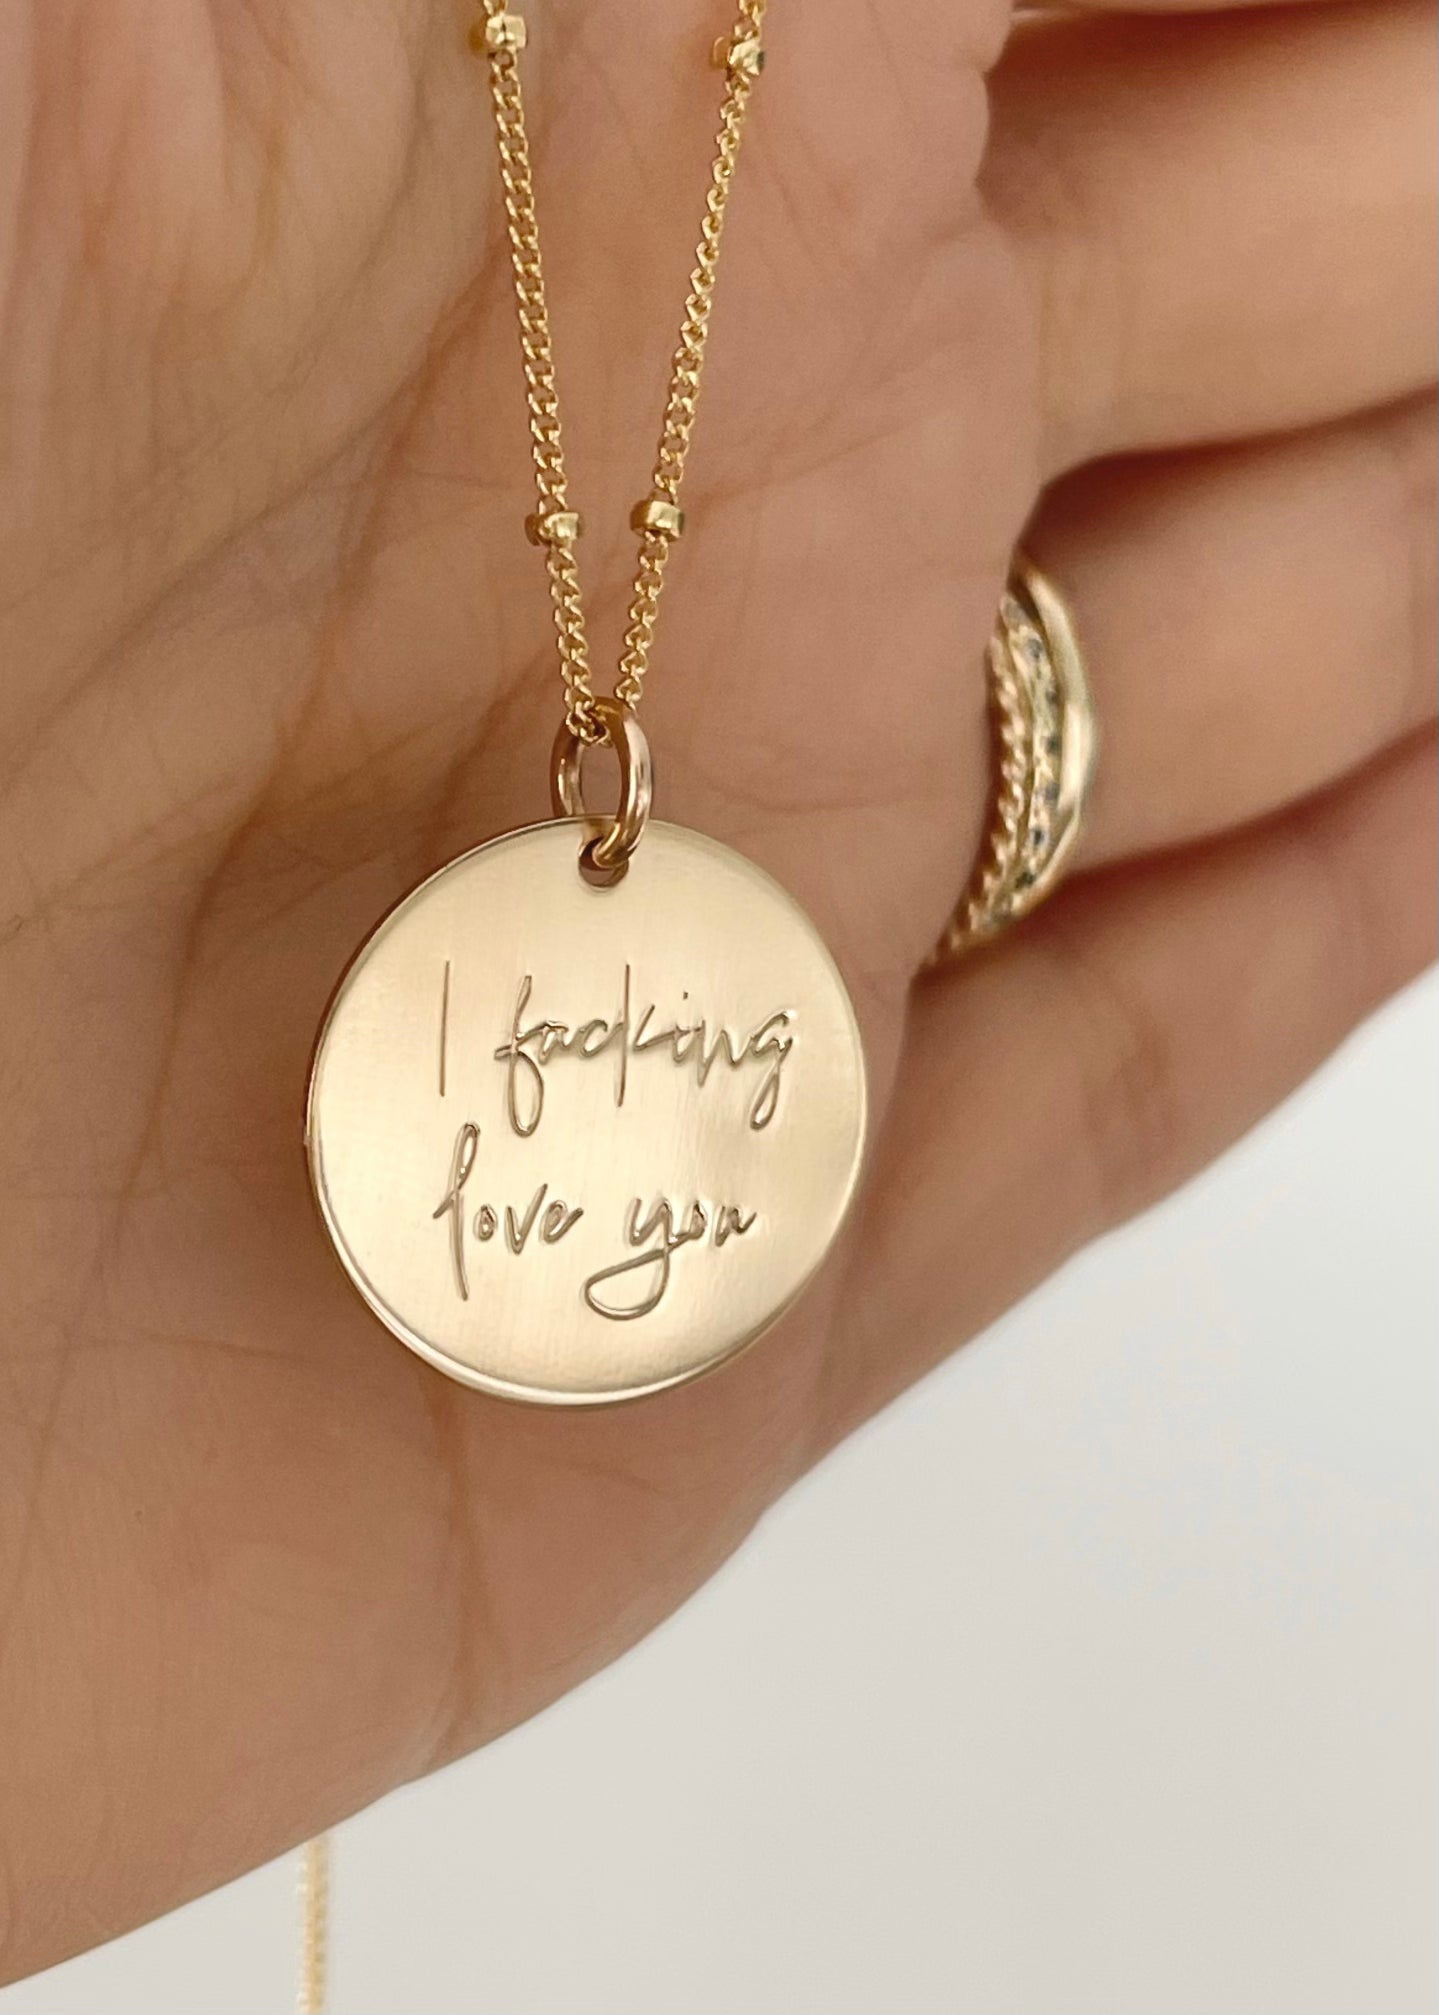 I F***ing Love You Necklace